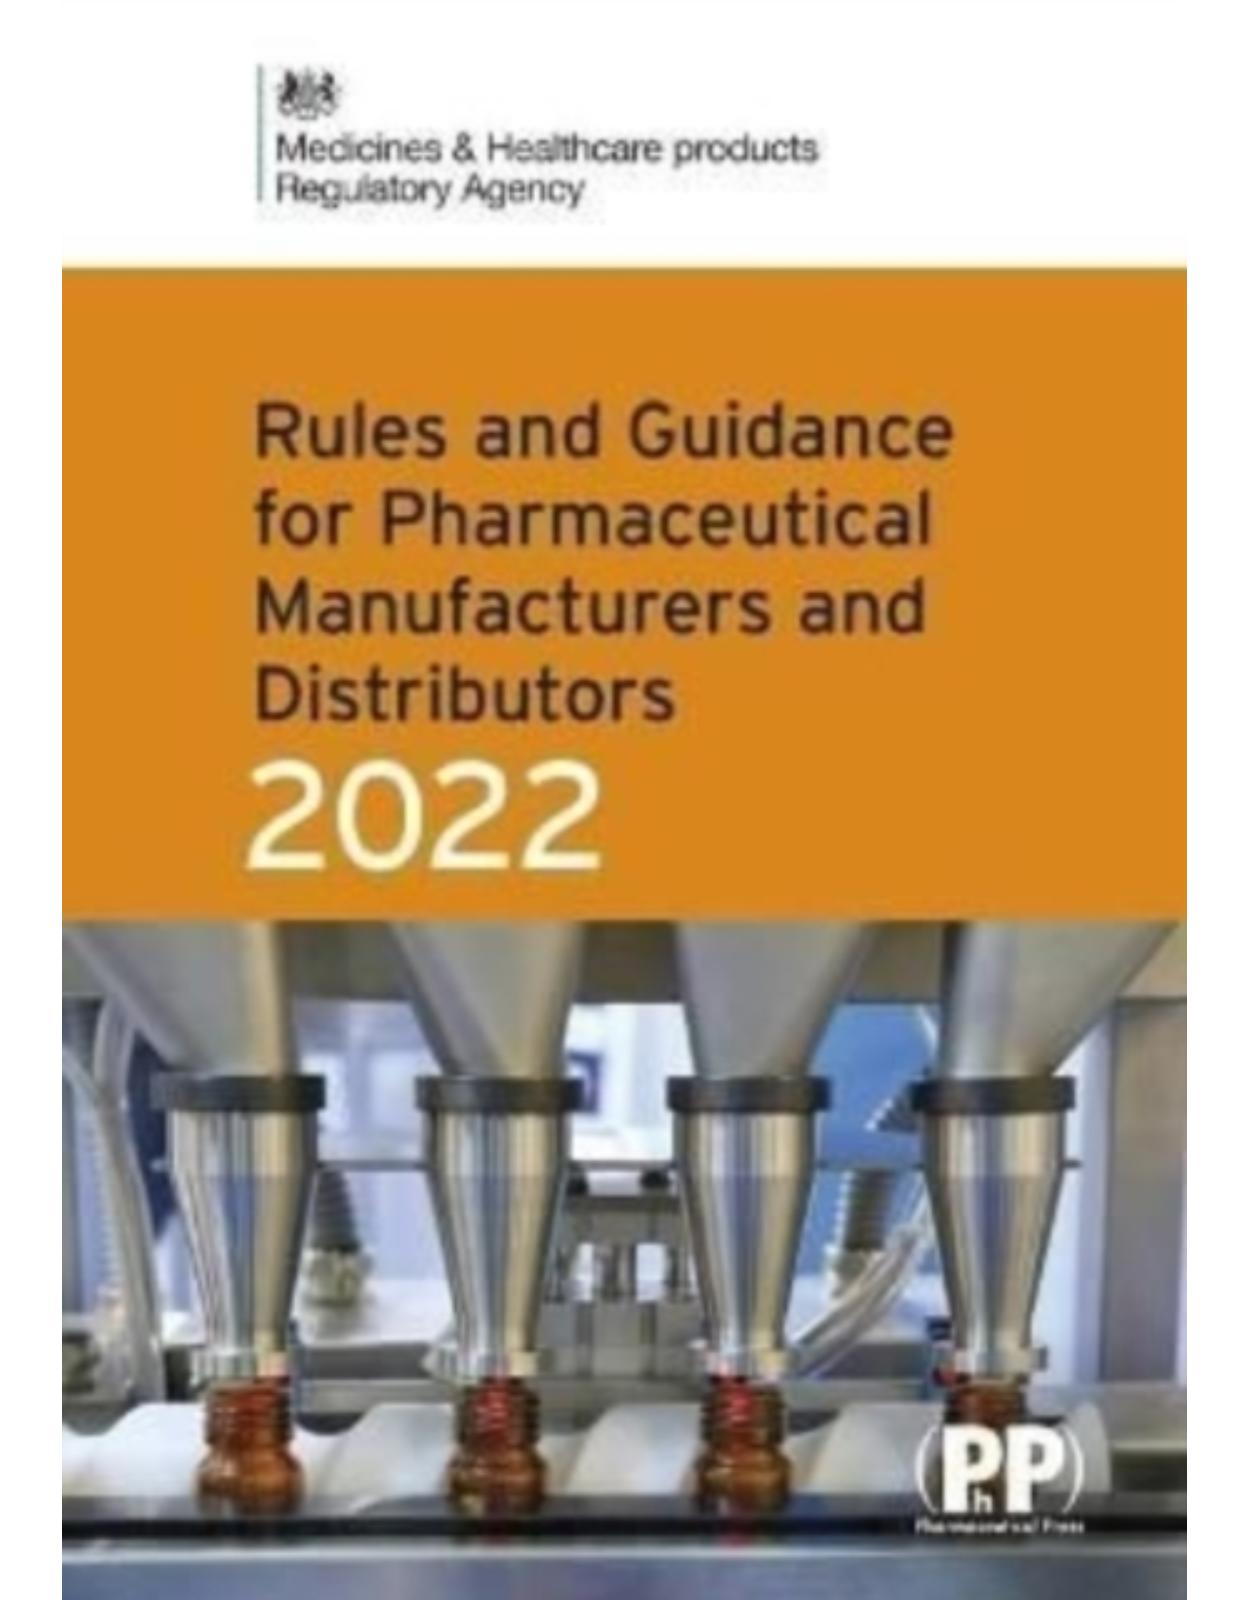 Rules and Guidance for Pharmaceutical Manufacturers and Distributors (Orange Guide) 2022